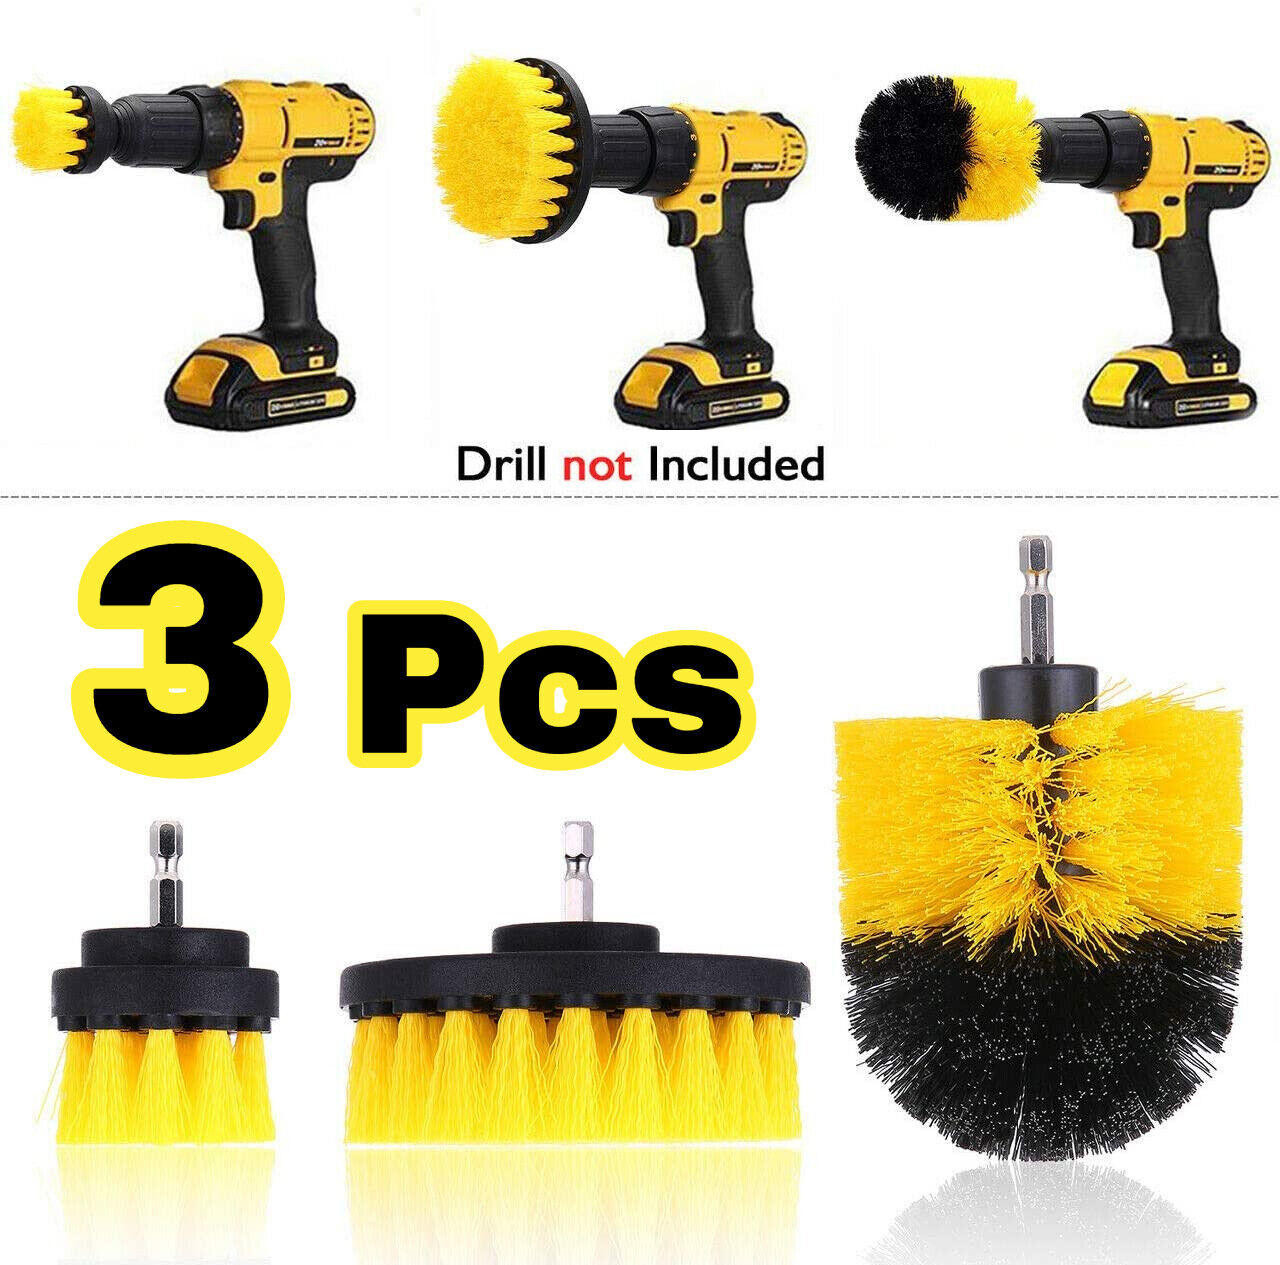 https://cdn11.bigcommerce.com/s-zrh8tkpr8d/images/stencil/1280x1280/products/9921/32787/3-pcs-drill-brushes-set-tile-grout-power-scrubber-cleaner-spin-tub-shower-wall__57784.1665668550.jpg?c=2